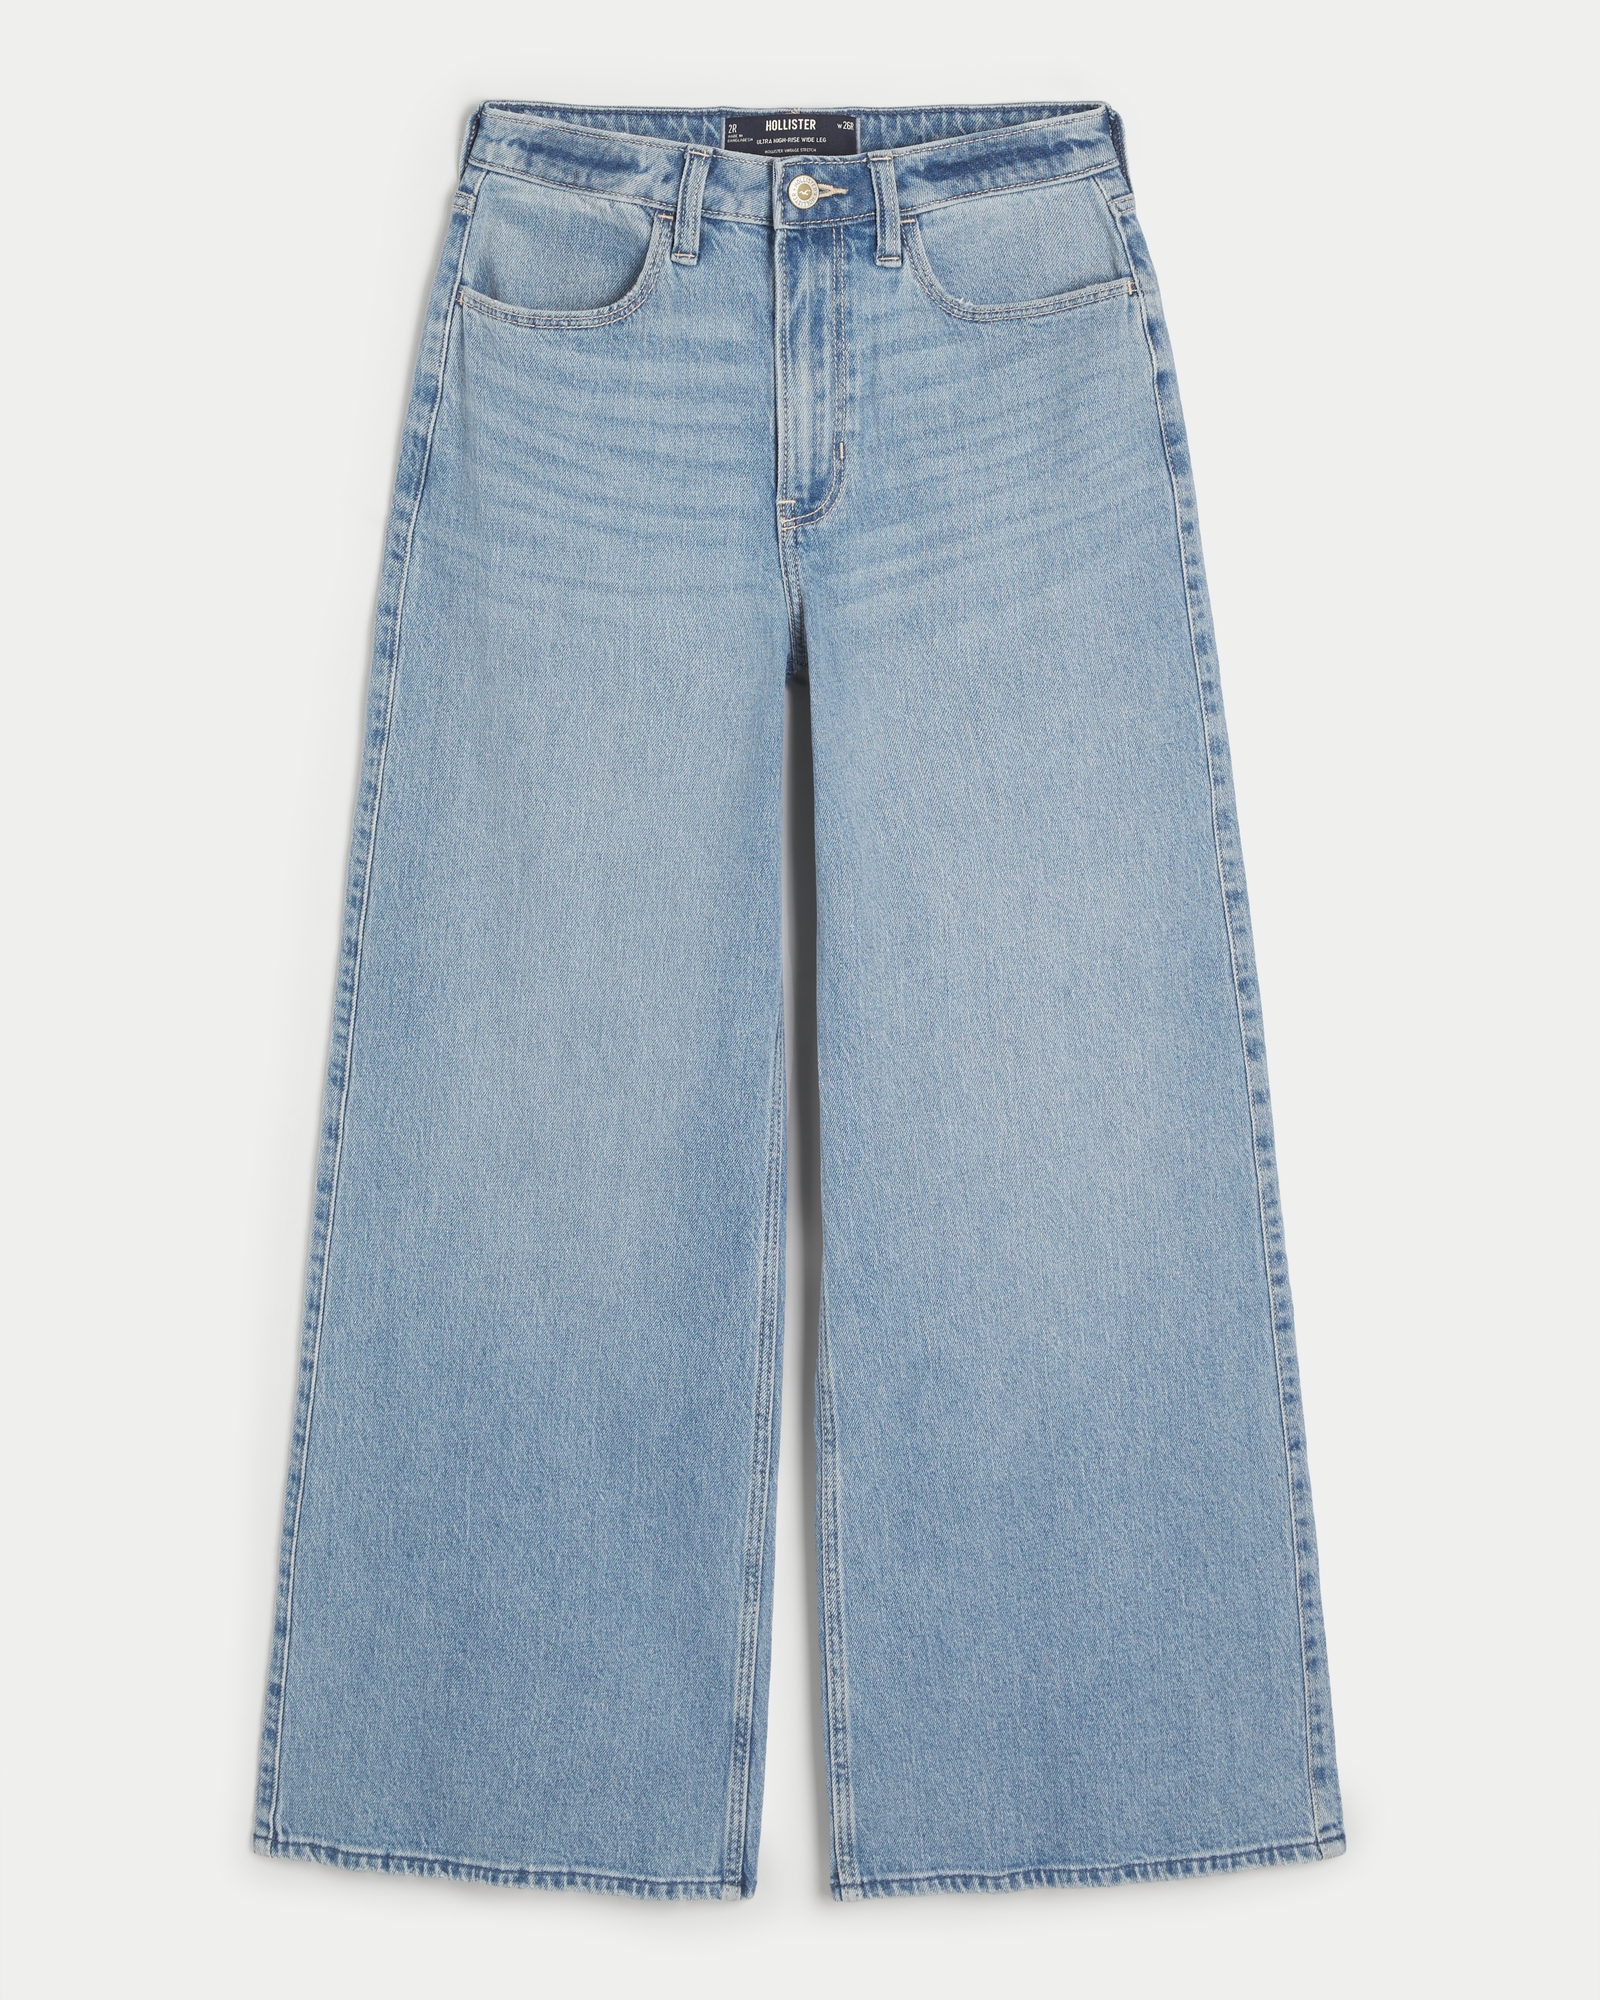 Hollister straight leg jeans in mid wash - ShopStyle